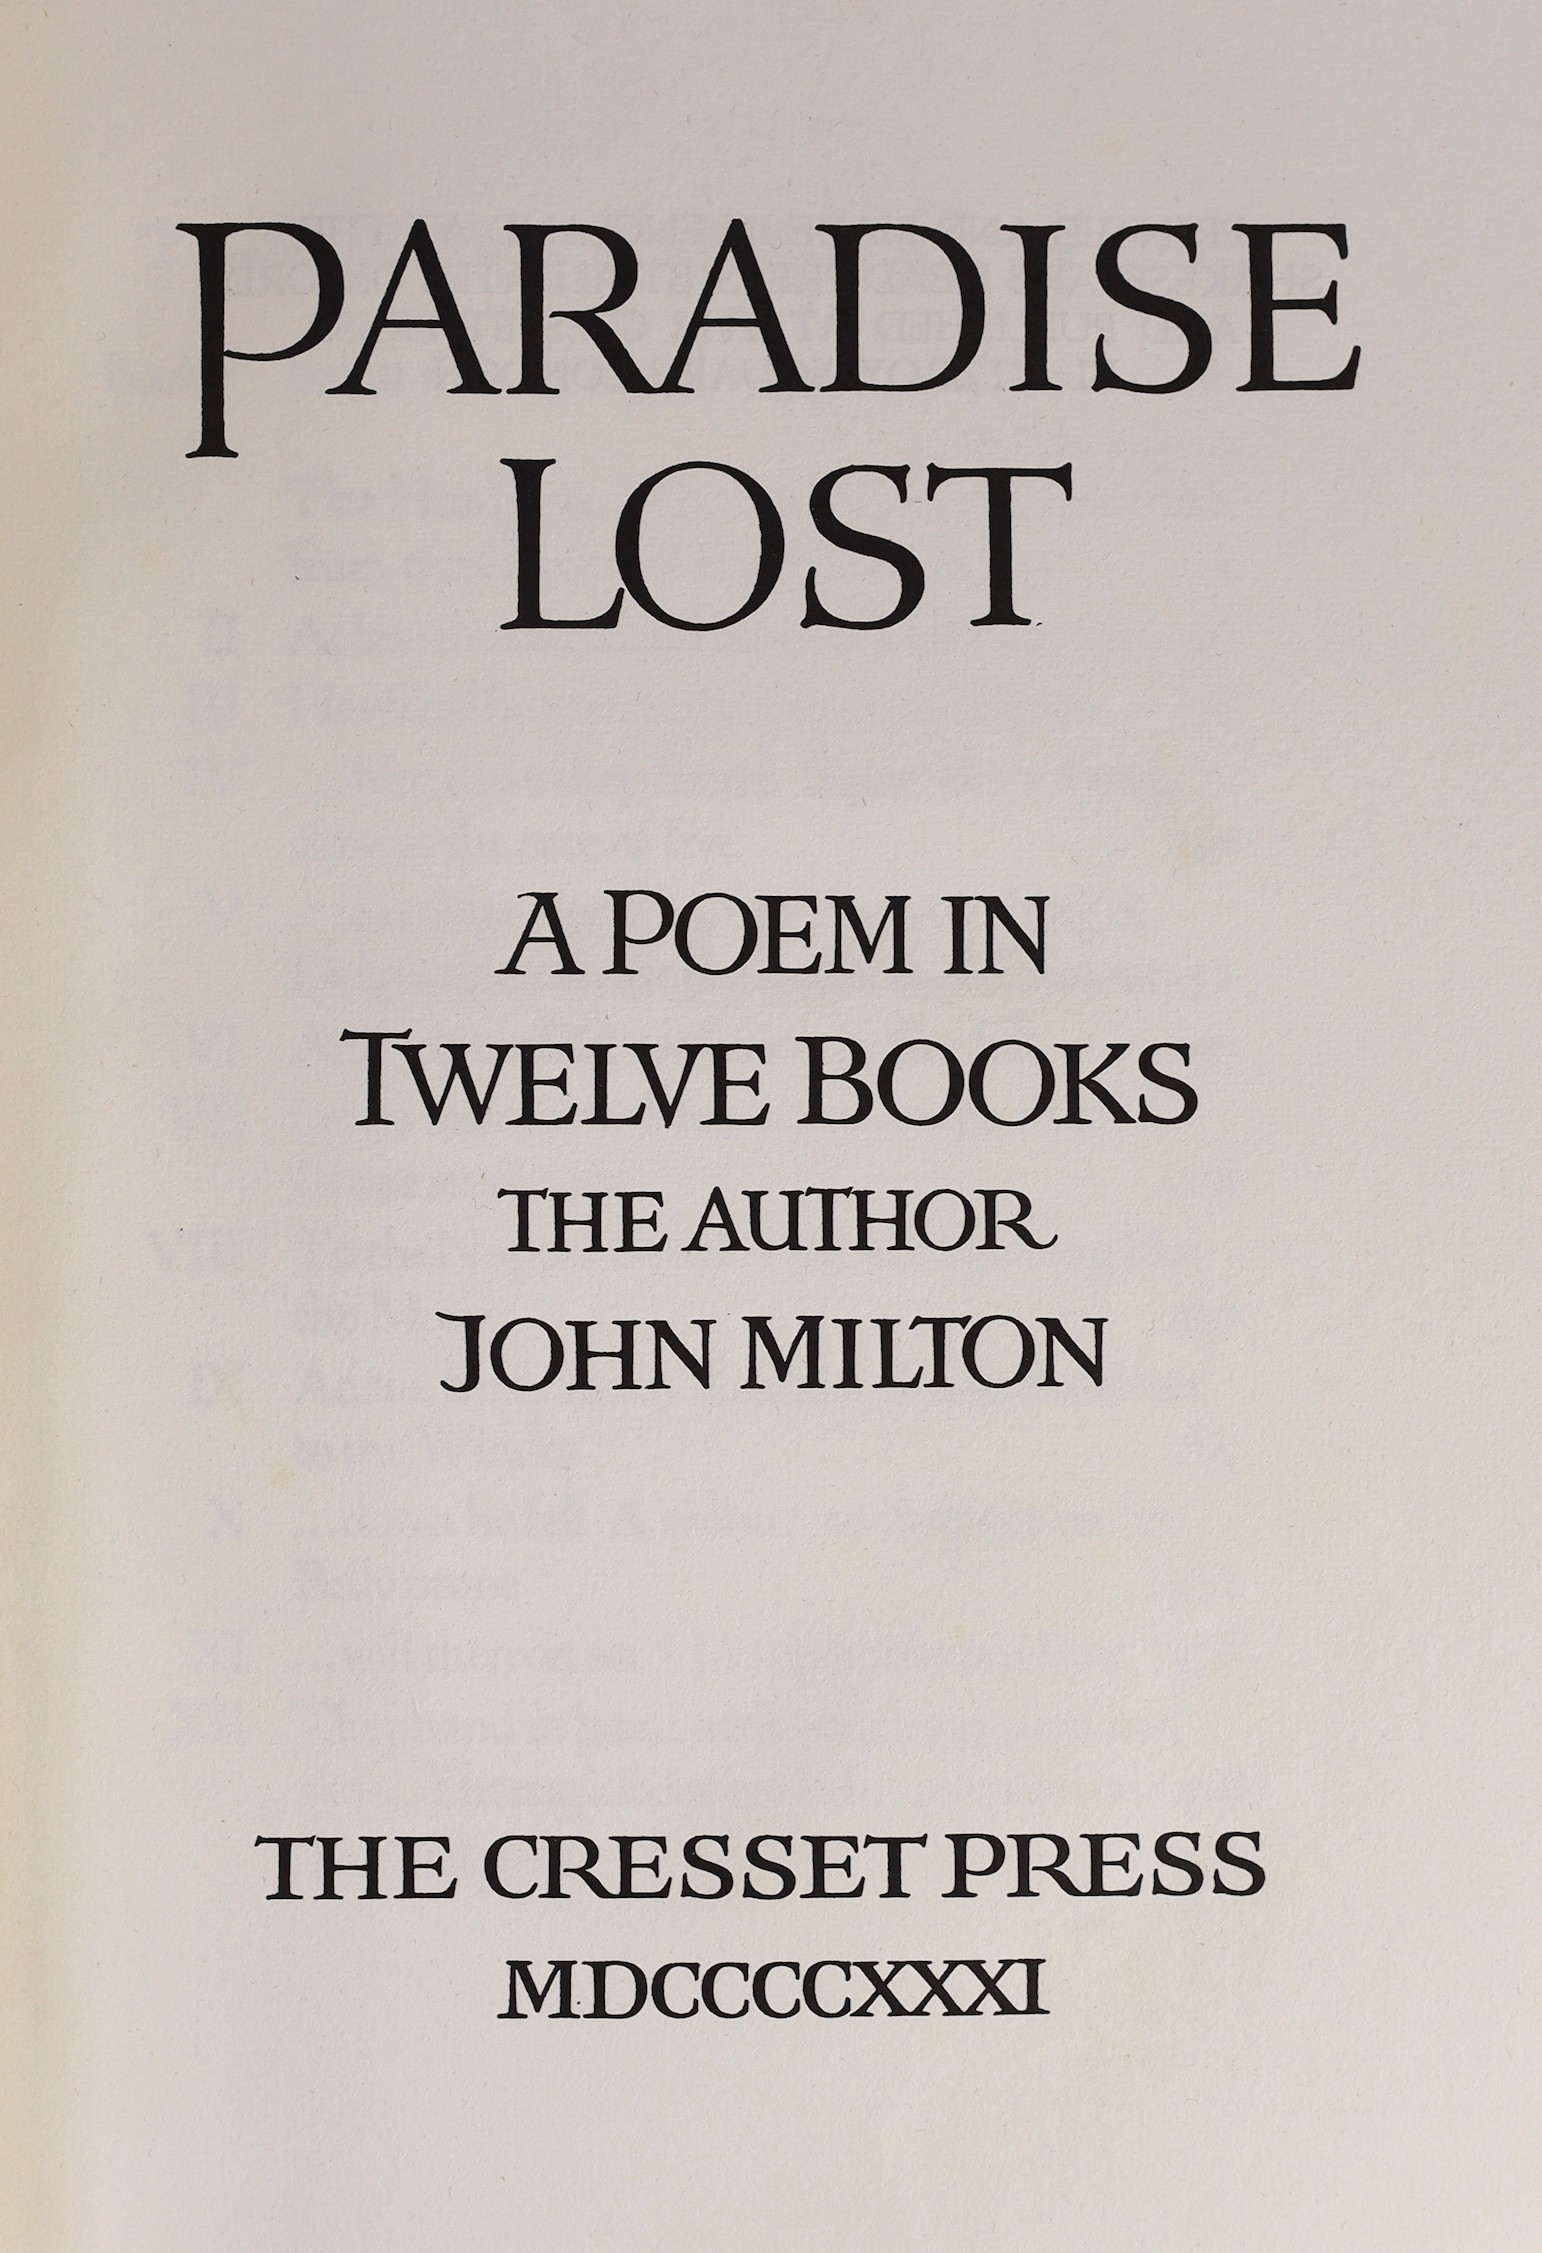 Cresset Press - London - Milton, John - Paradise Lost; Paradise Regain’d, one of 195, 2 vols, 4to, pigskin binding stamped - ‘’Wood of London’’, (Henry T. Wood, established 1875), illustrated with wood-engravings by Deme